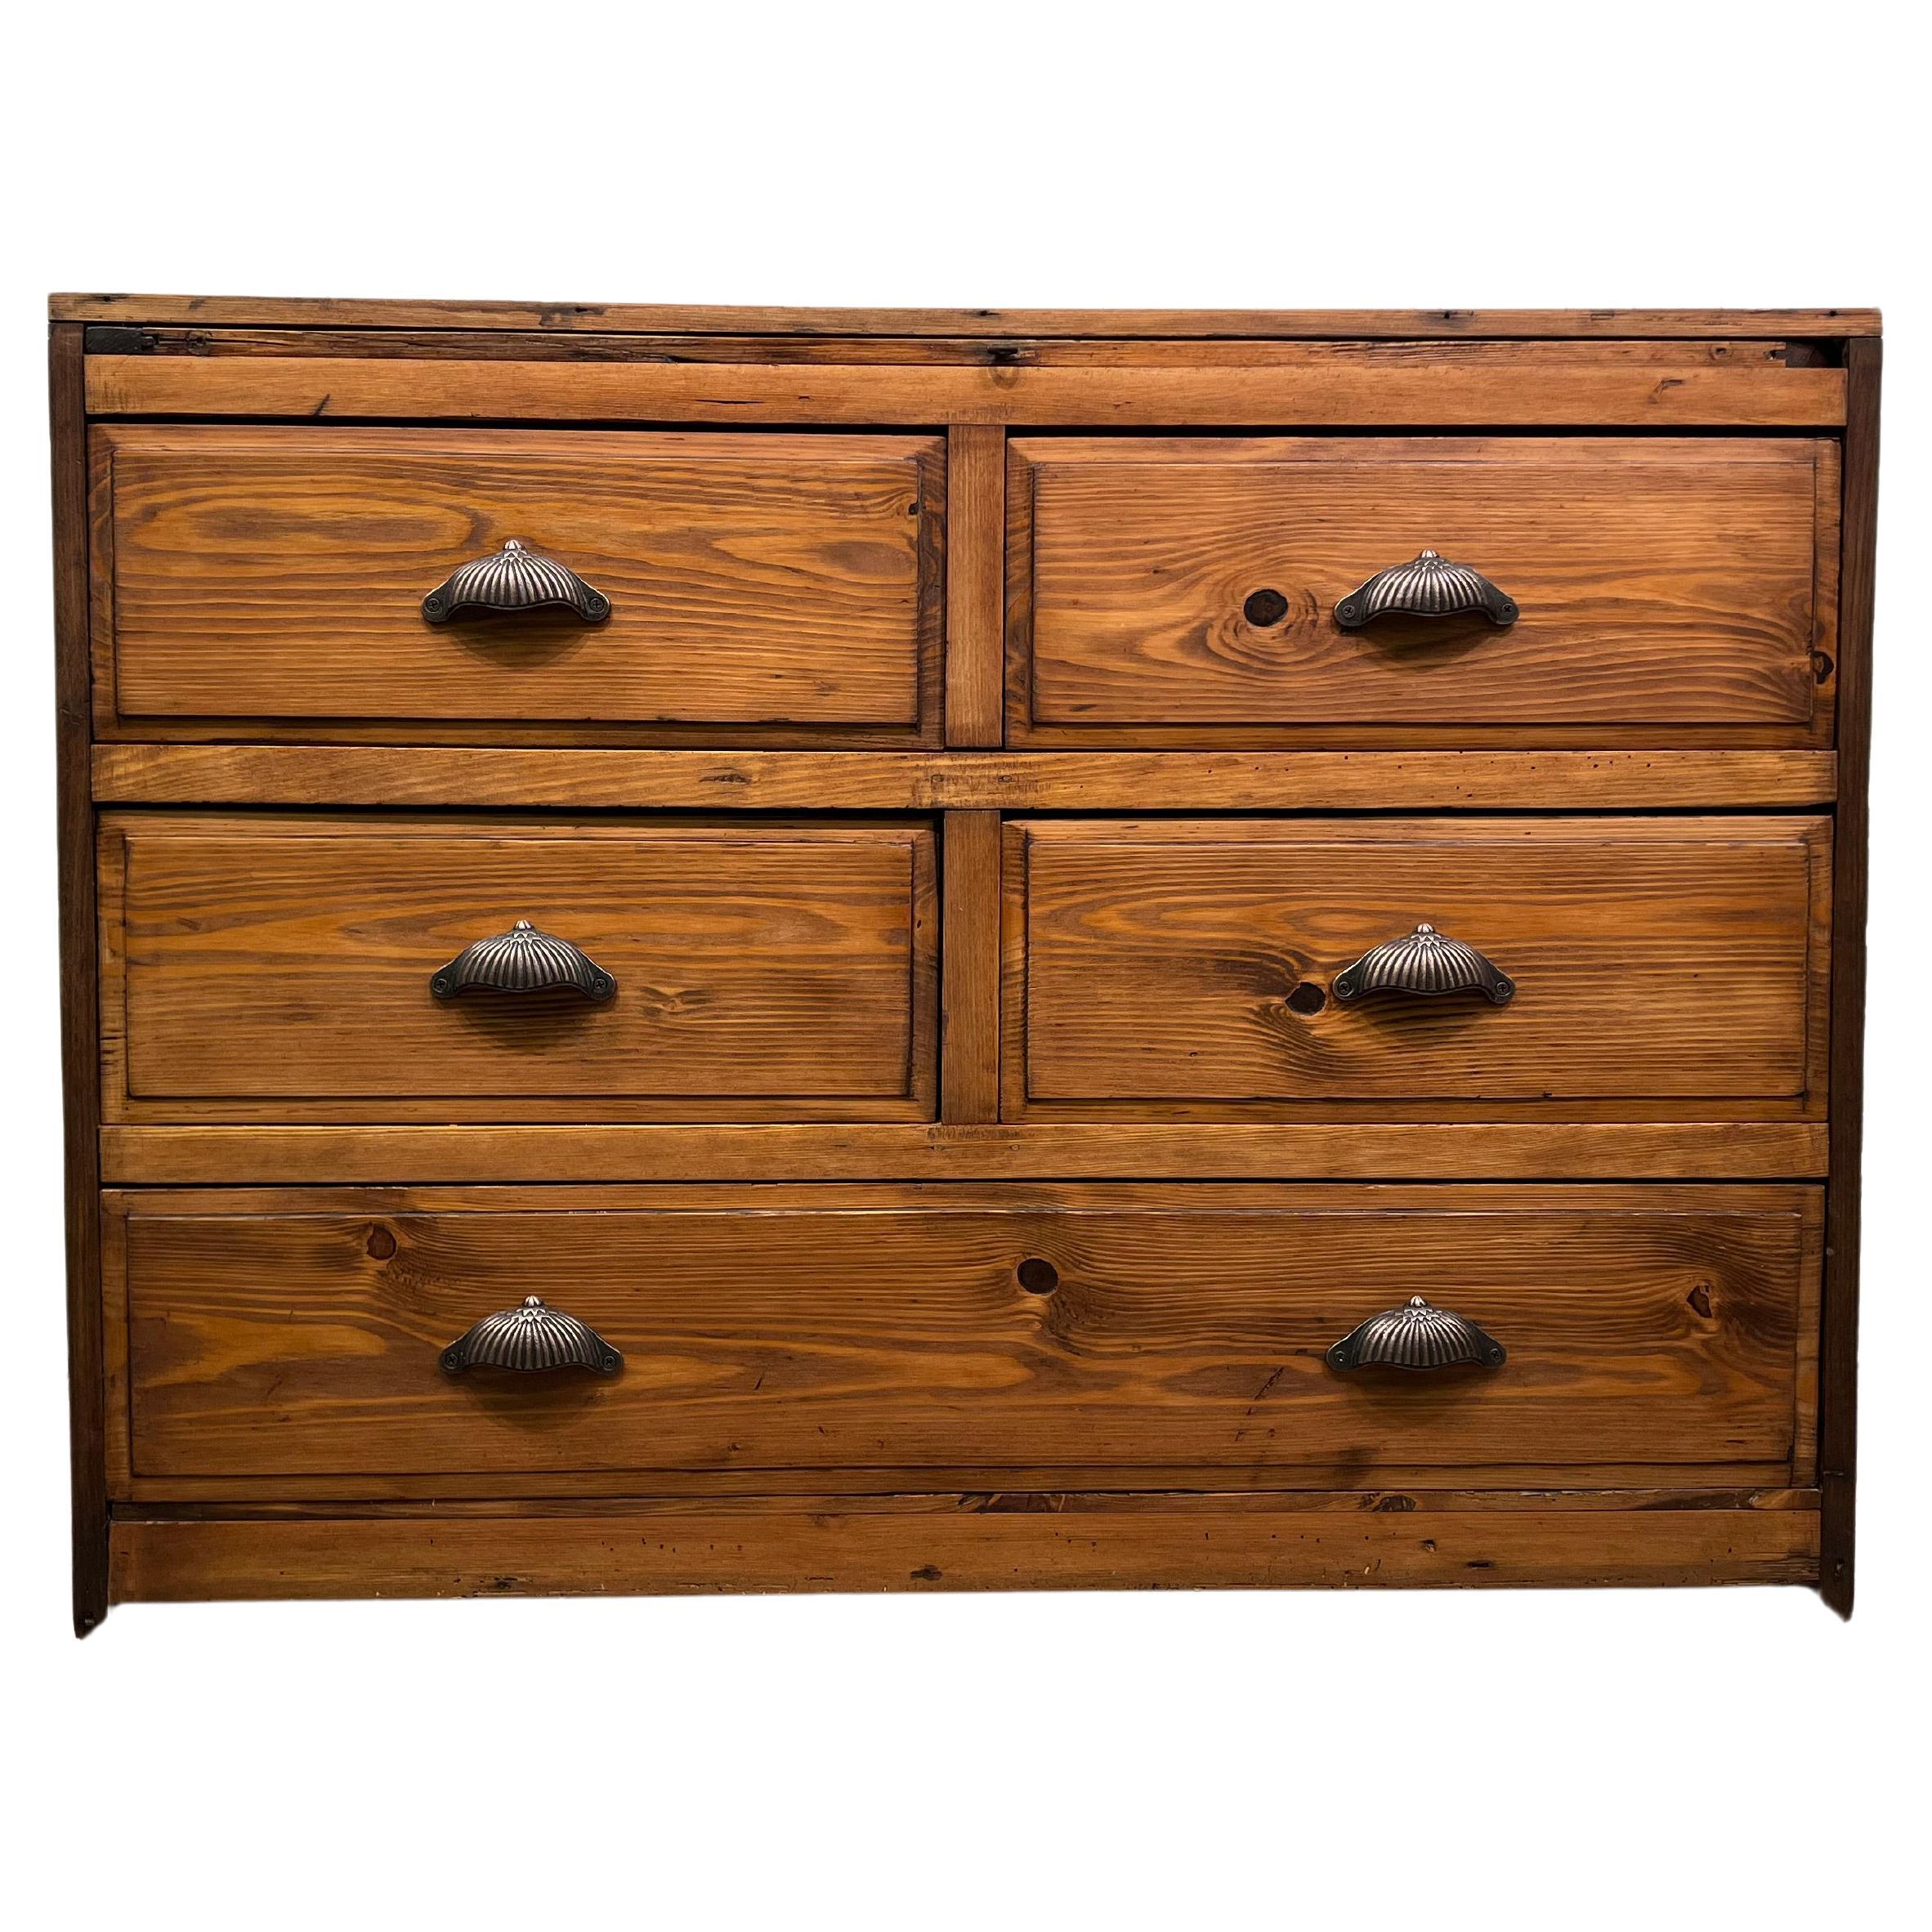 This French 1920's country farmhouse Dresser is a true piece of antique beauty. The solid oak sides provide a sturdy and durable construction, while the two plank pine top and Pine drawers add a touch of provincial rustic charm. The spacious drawers